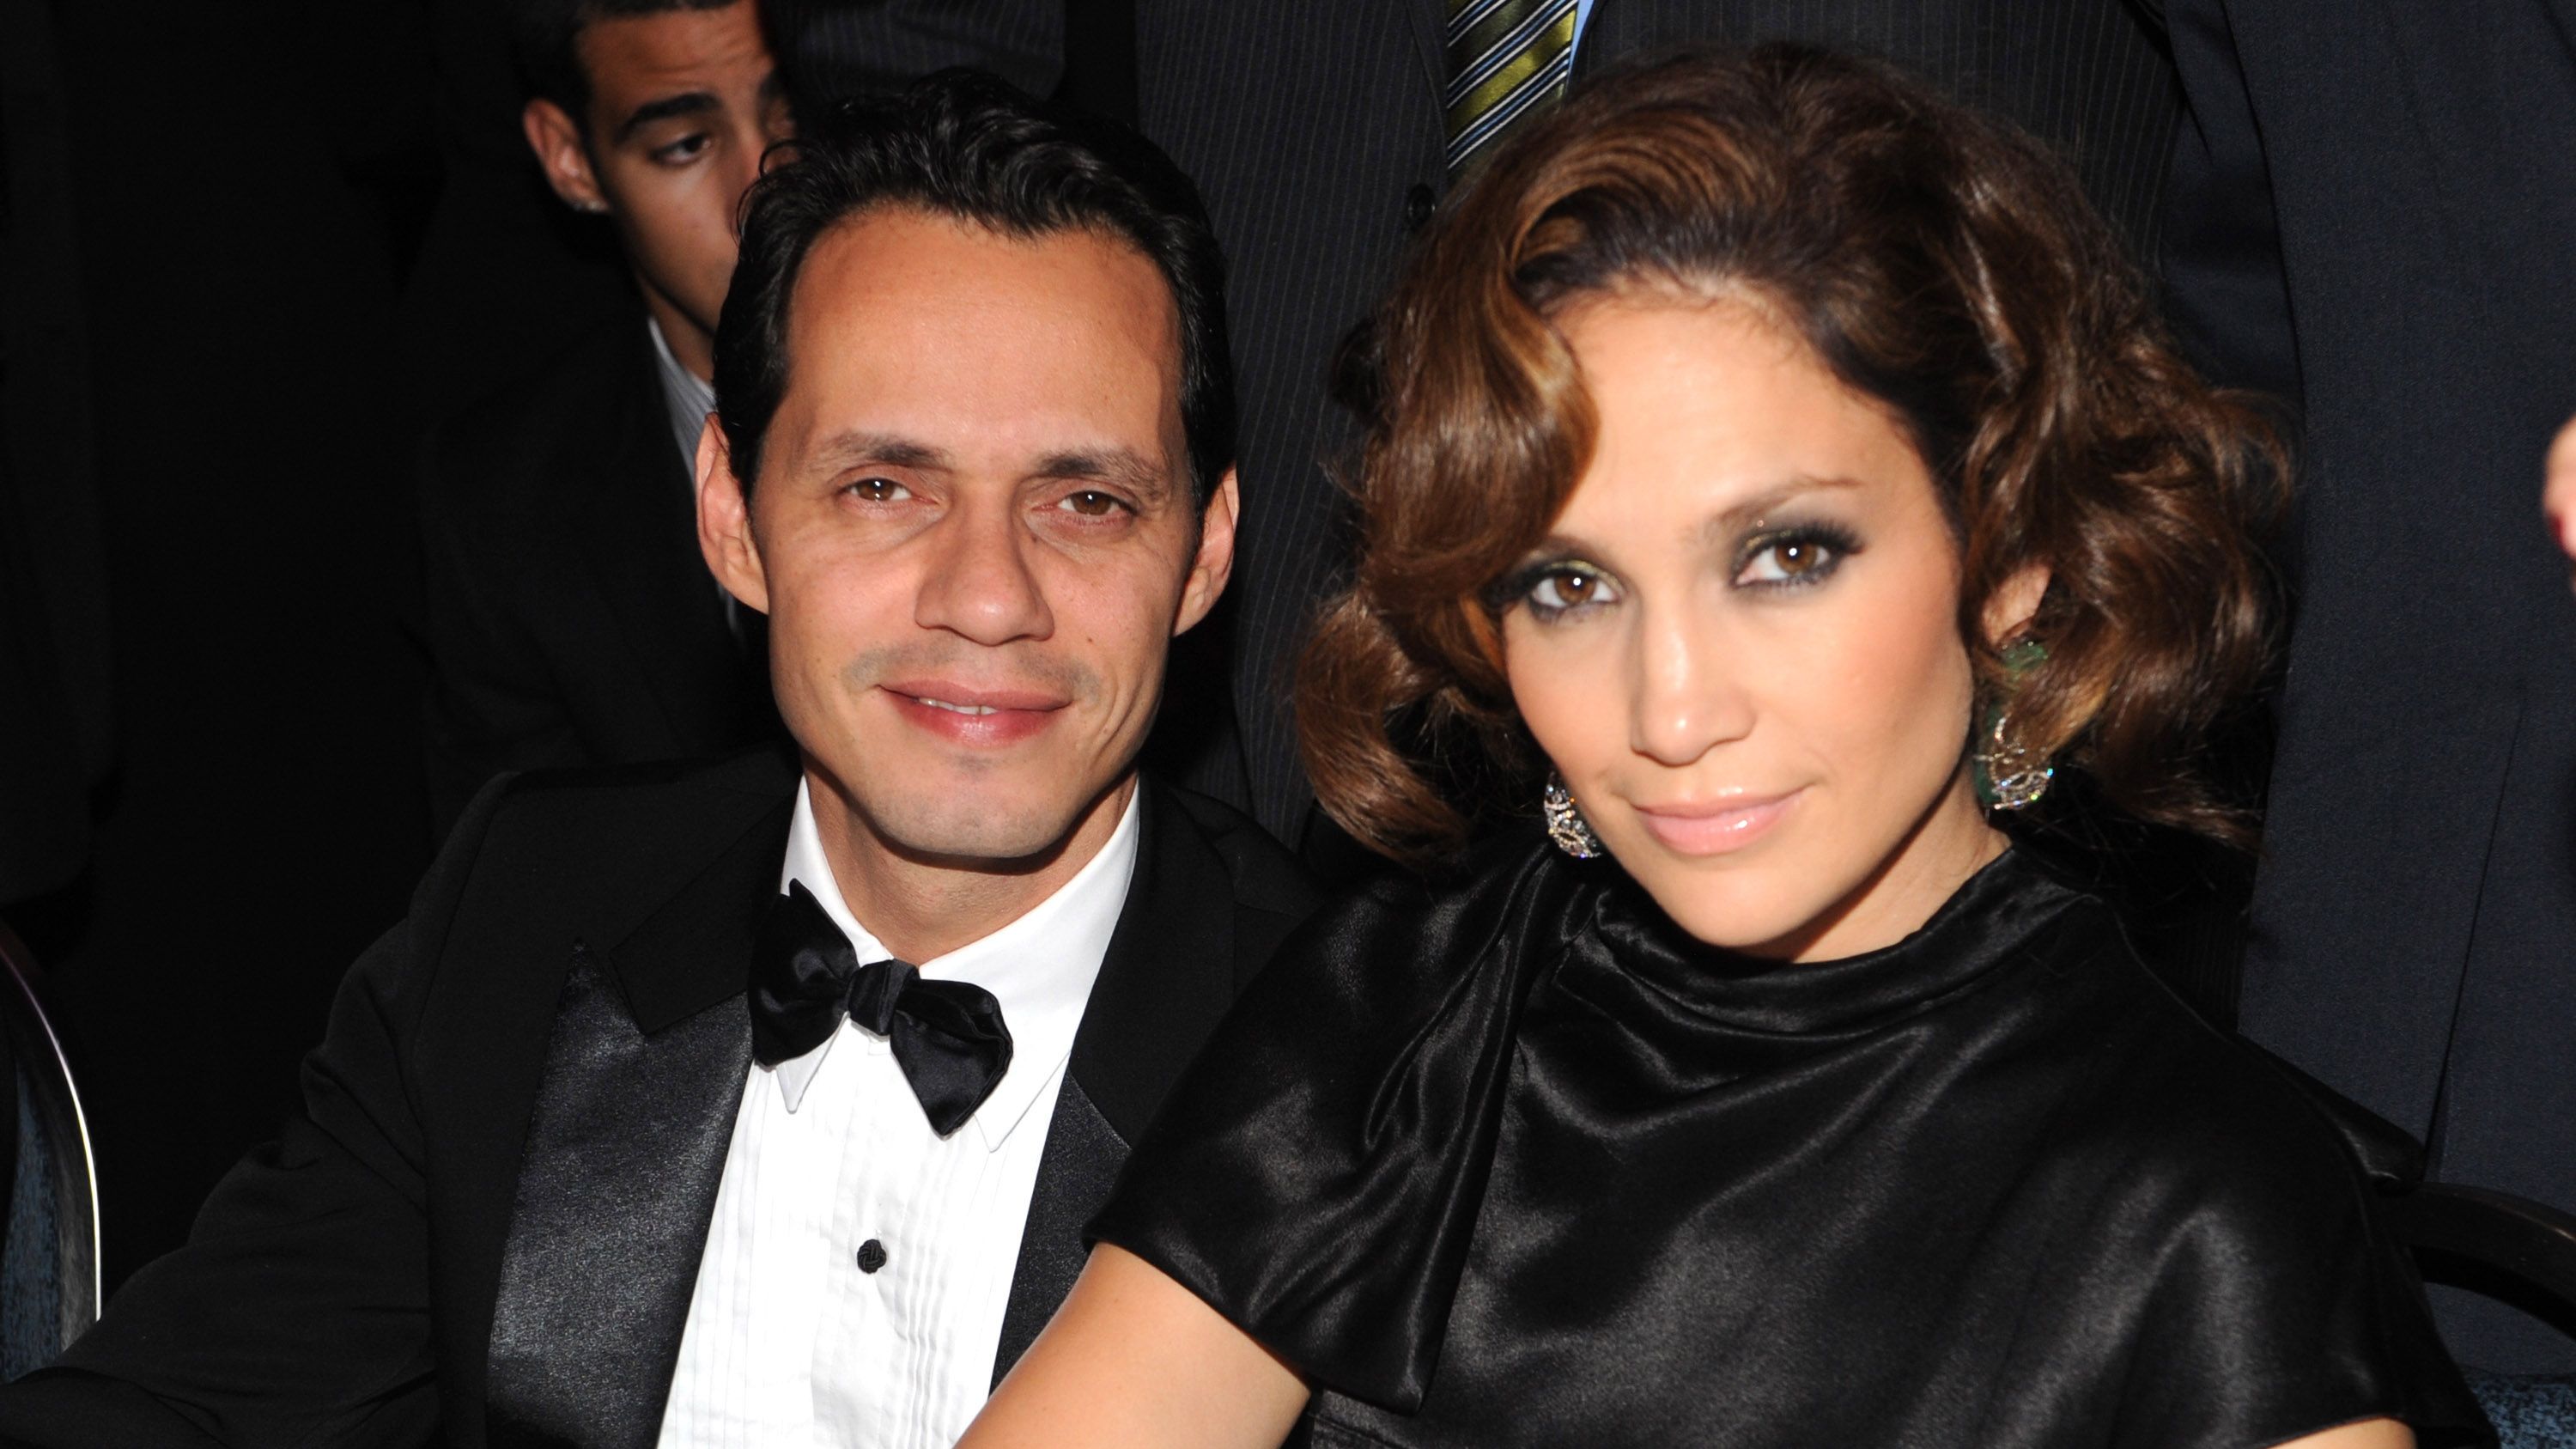 Alex Rodriguez's dating history: Jennifer Lopez and all his exes